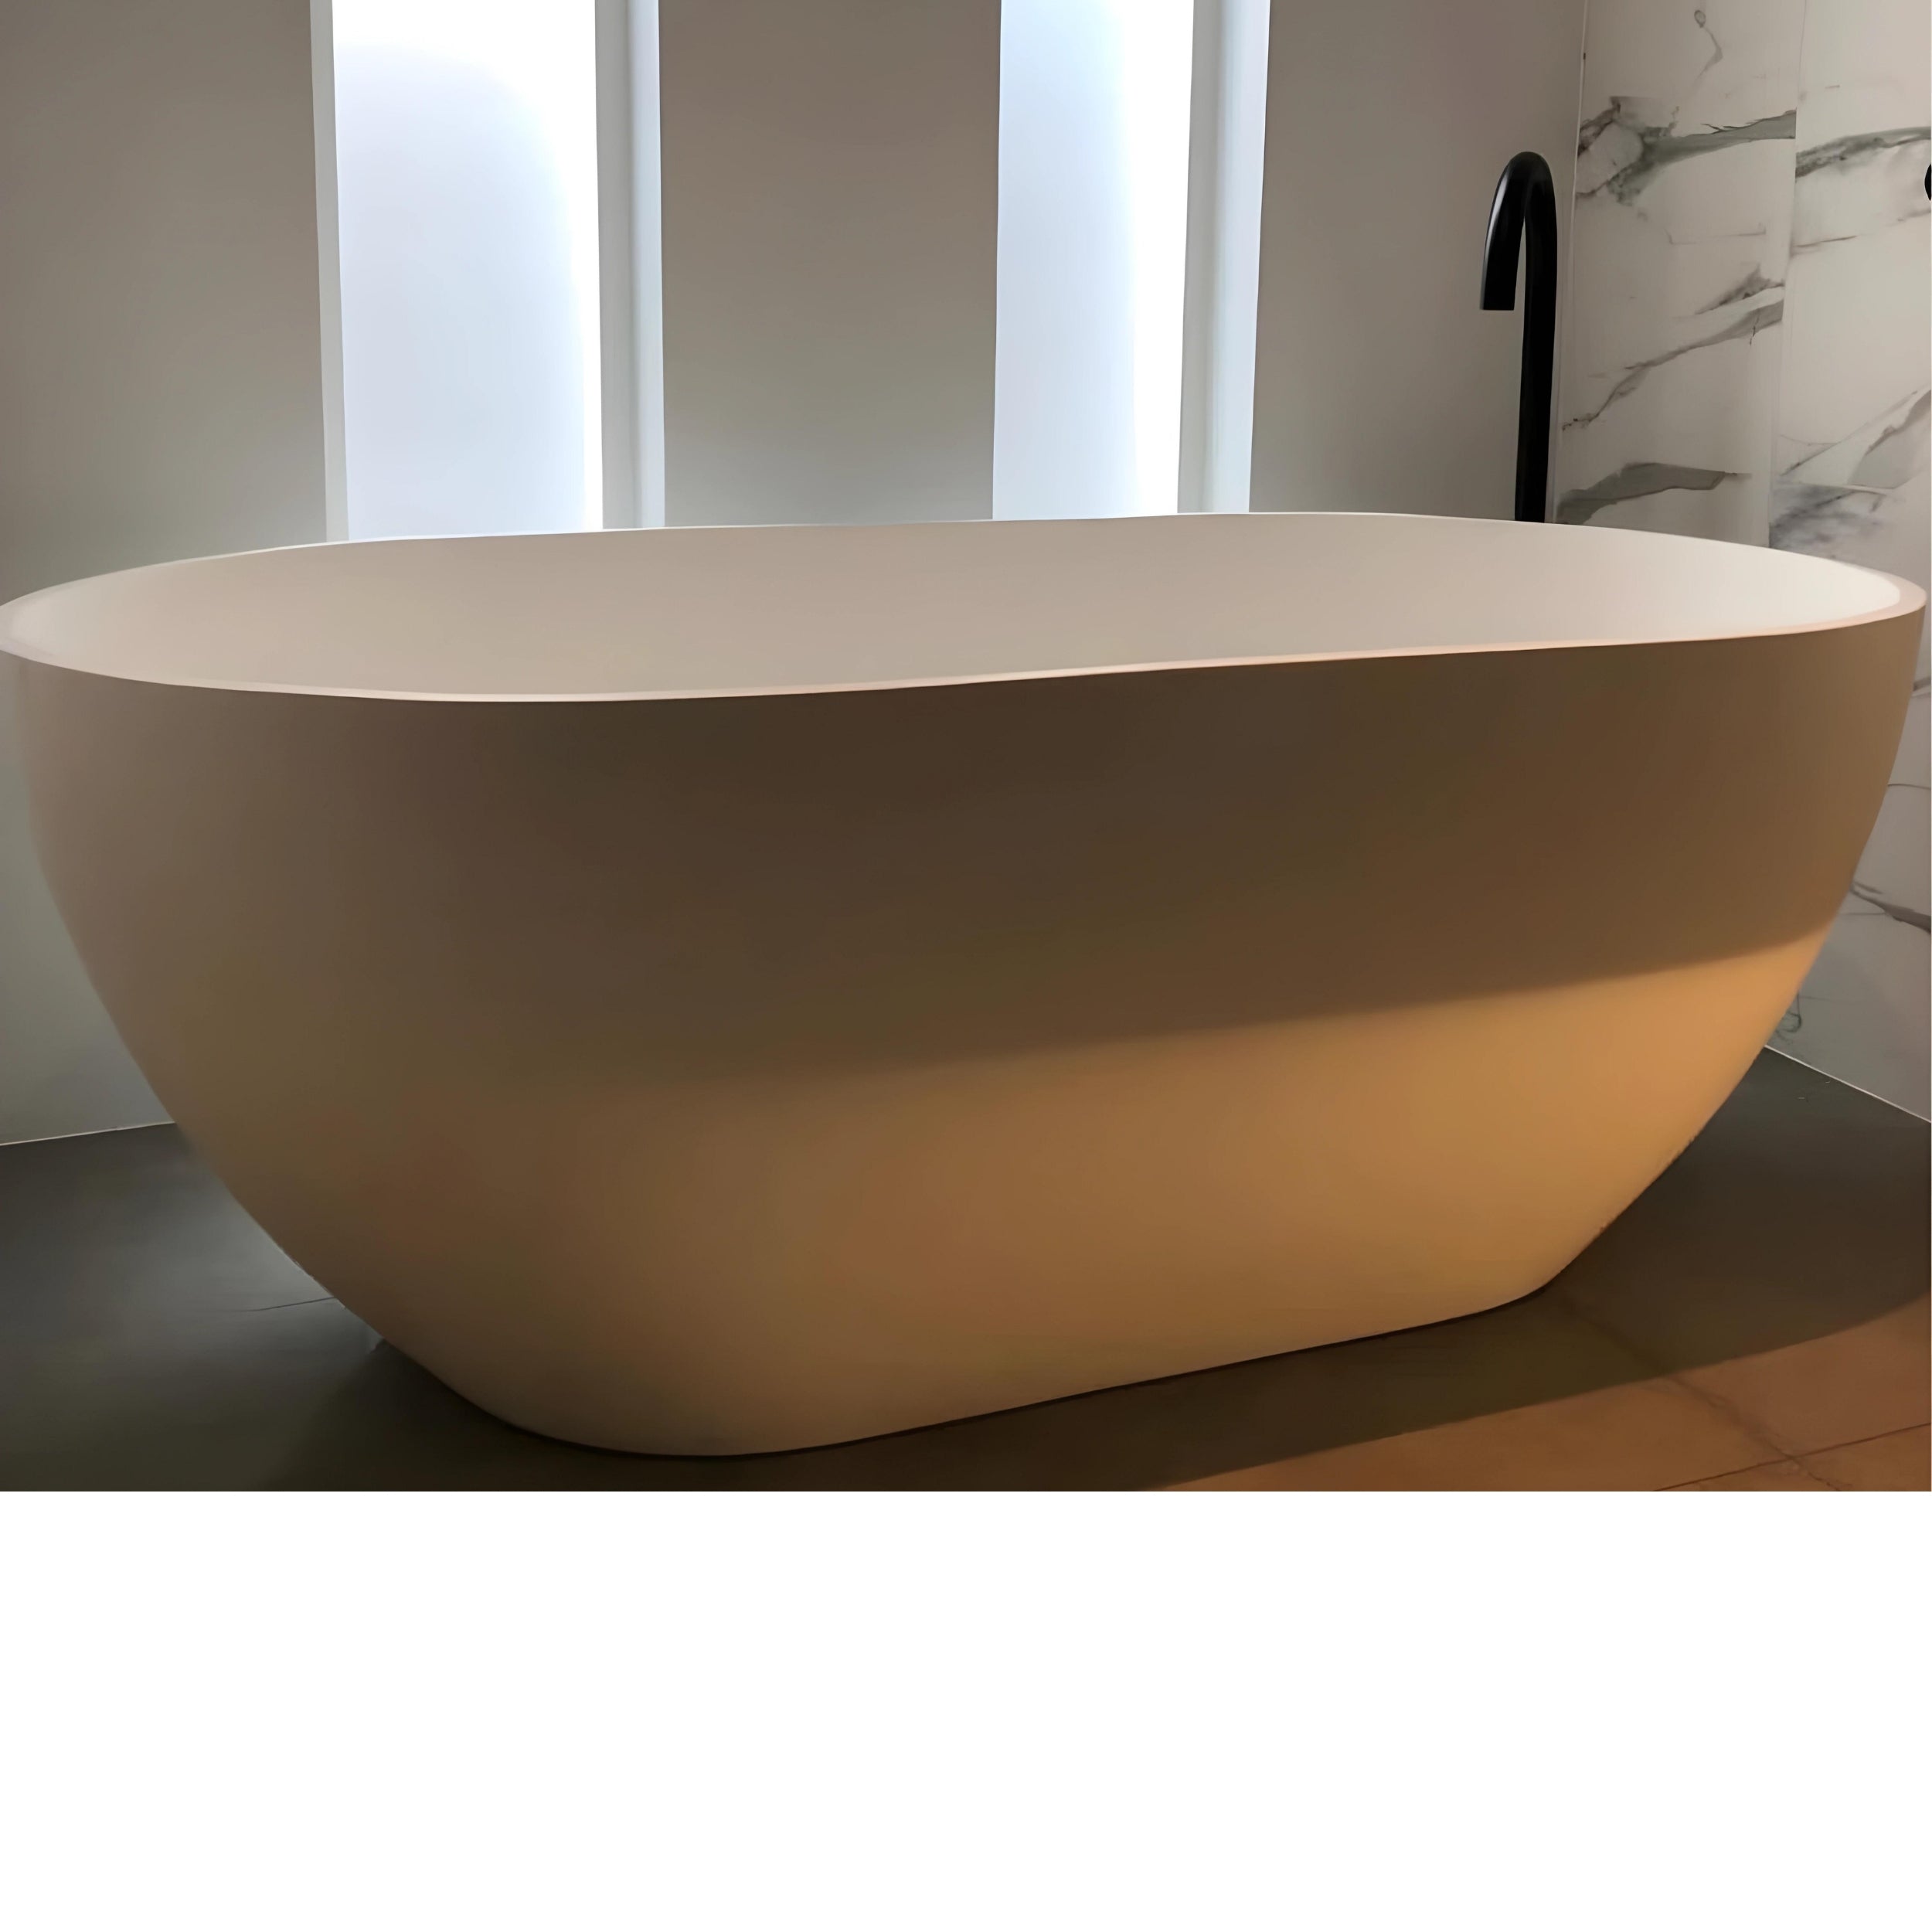 PIETRA BIANCA BELLA MODERN FREESTANDING STONE BATHTUB WITH MULTICOLOUR (AVAILABLE IN 1500MM, 1600MM, 1700MM AND 1800MM)